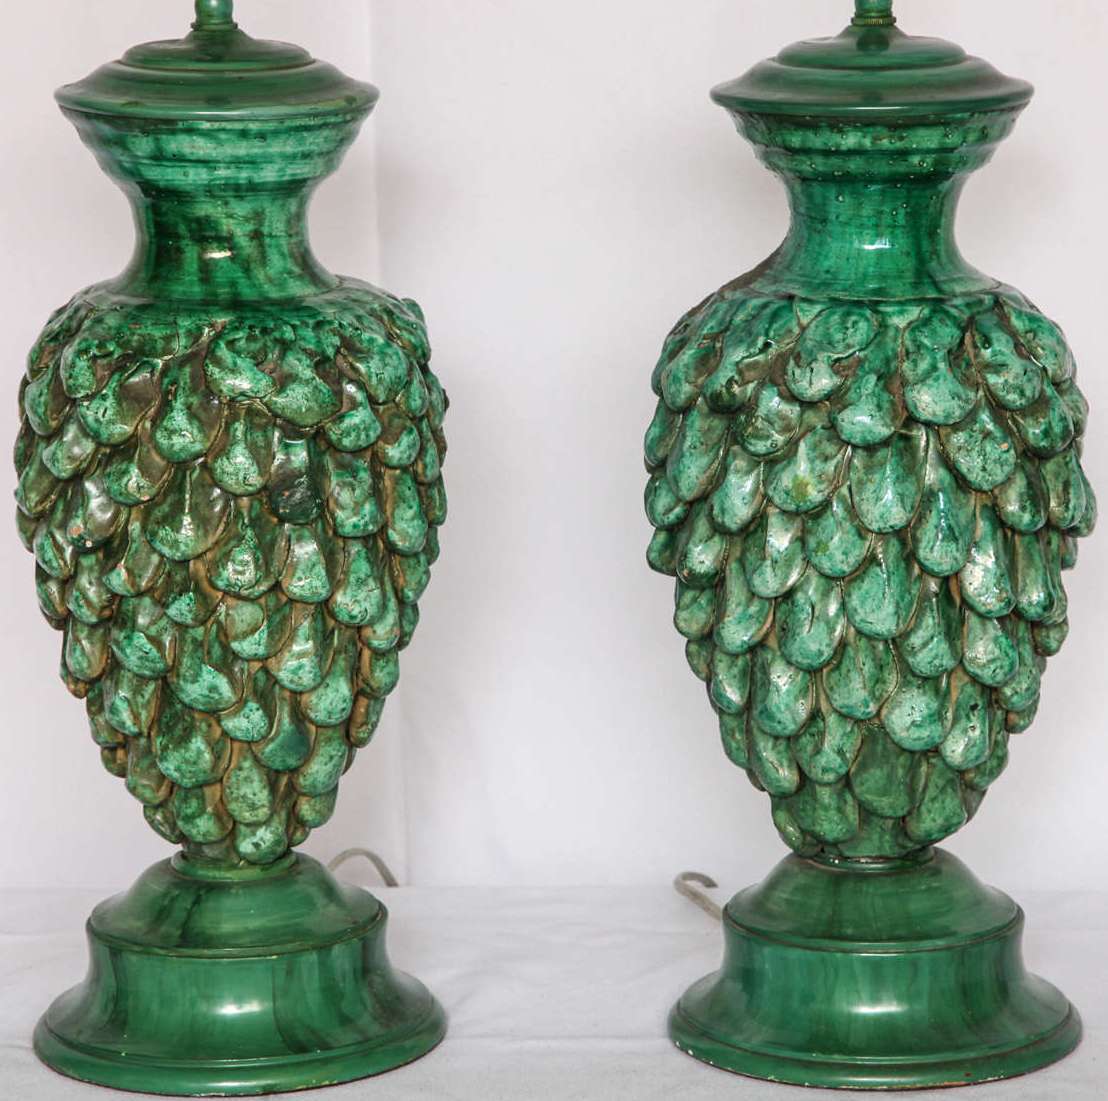 Pair of vintage Italian rich green Majolica pine cone lamps with painted metal fittings. Measures: Overall 30